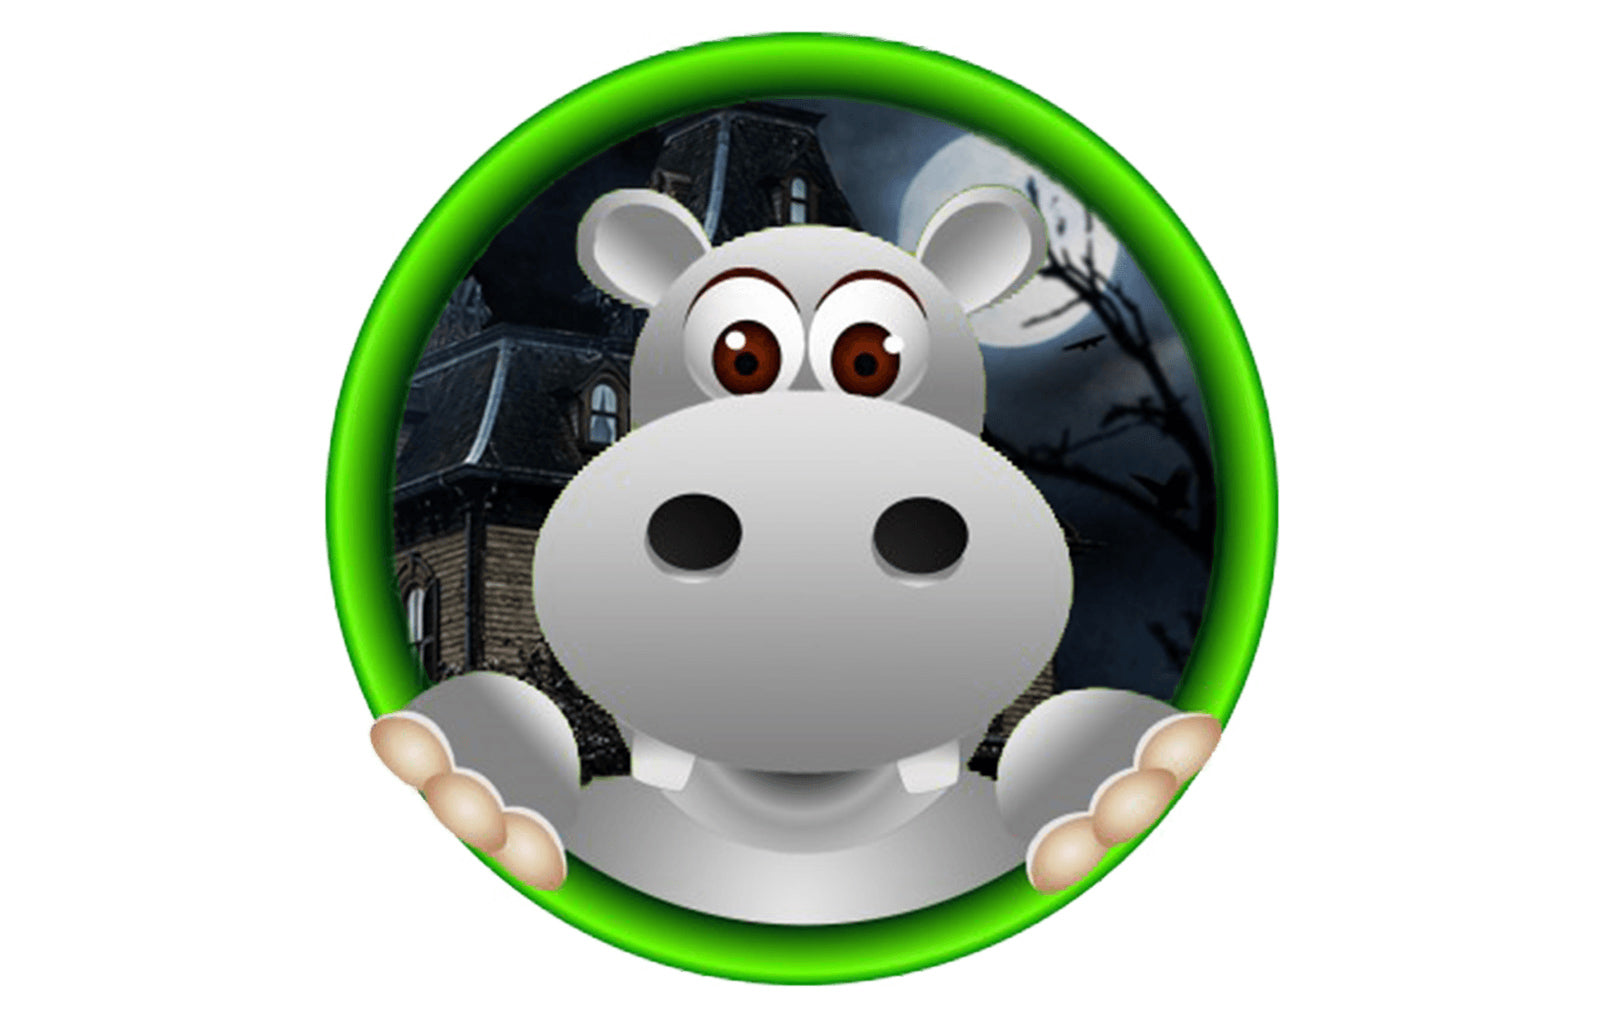 Featured Image of Puddles the Hippo character representing the Happy Hippo Product White Borneo Kratom Powder (Ghost Hippo)